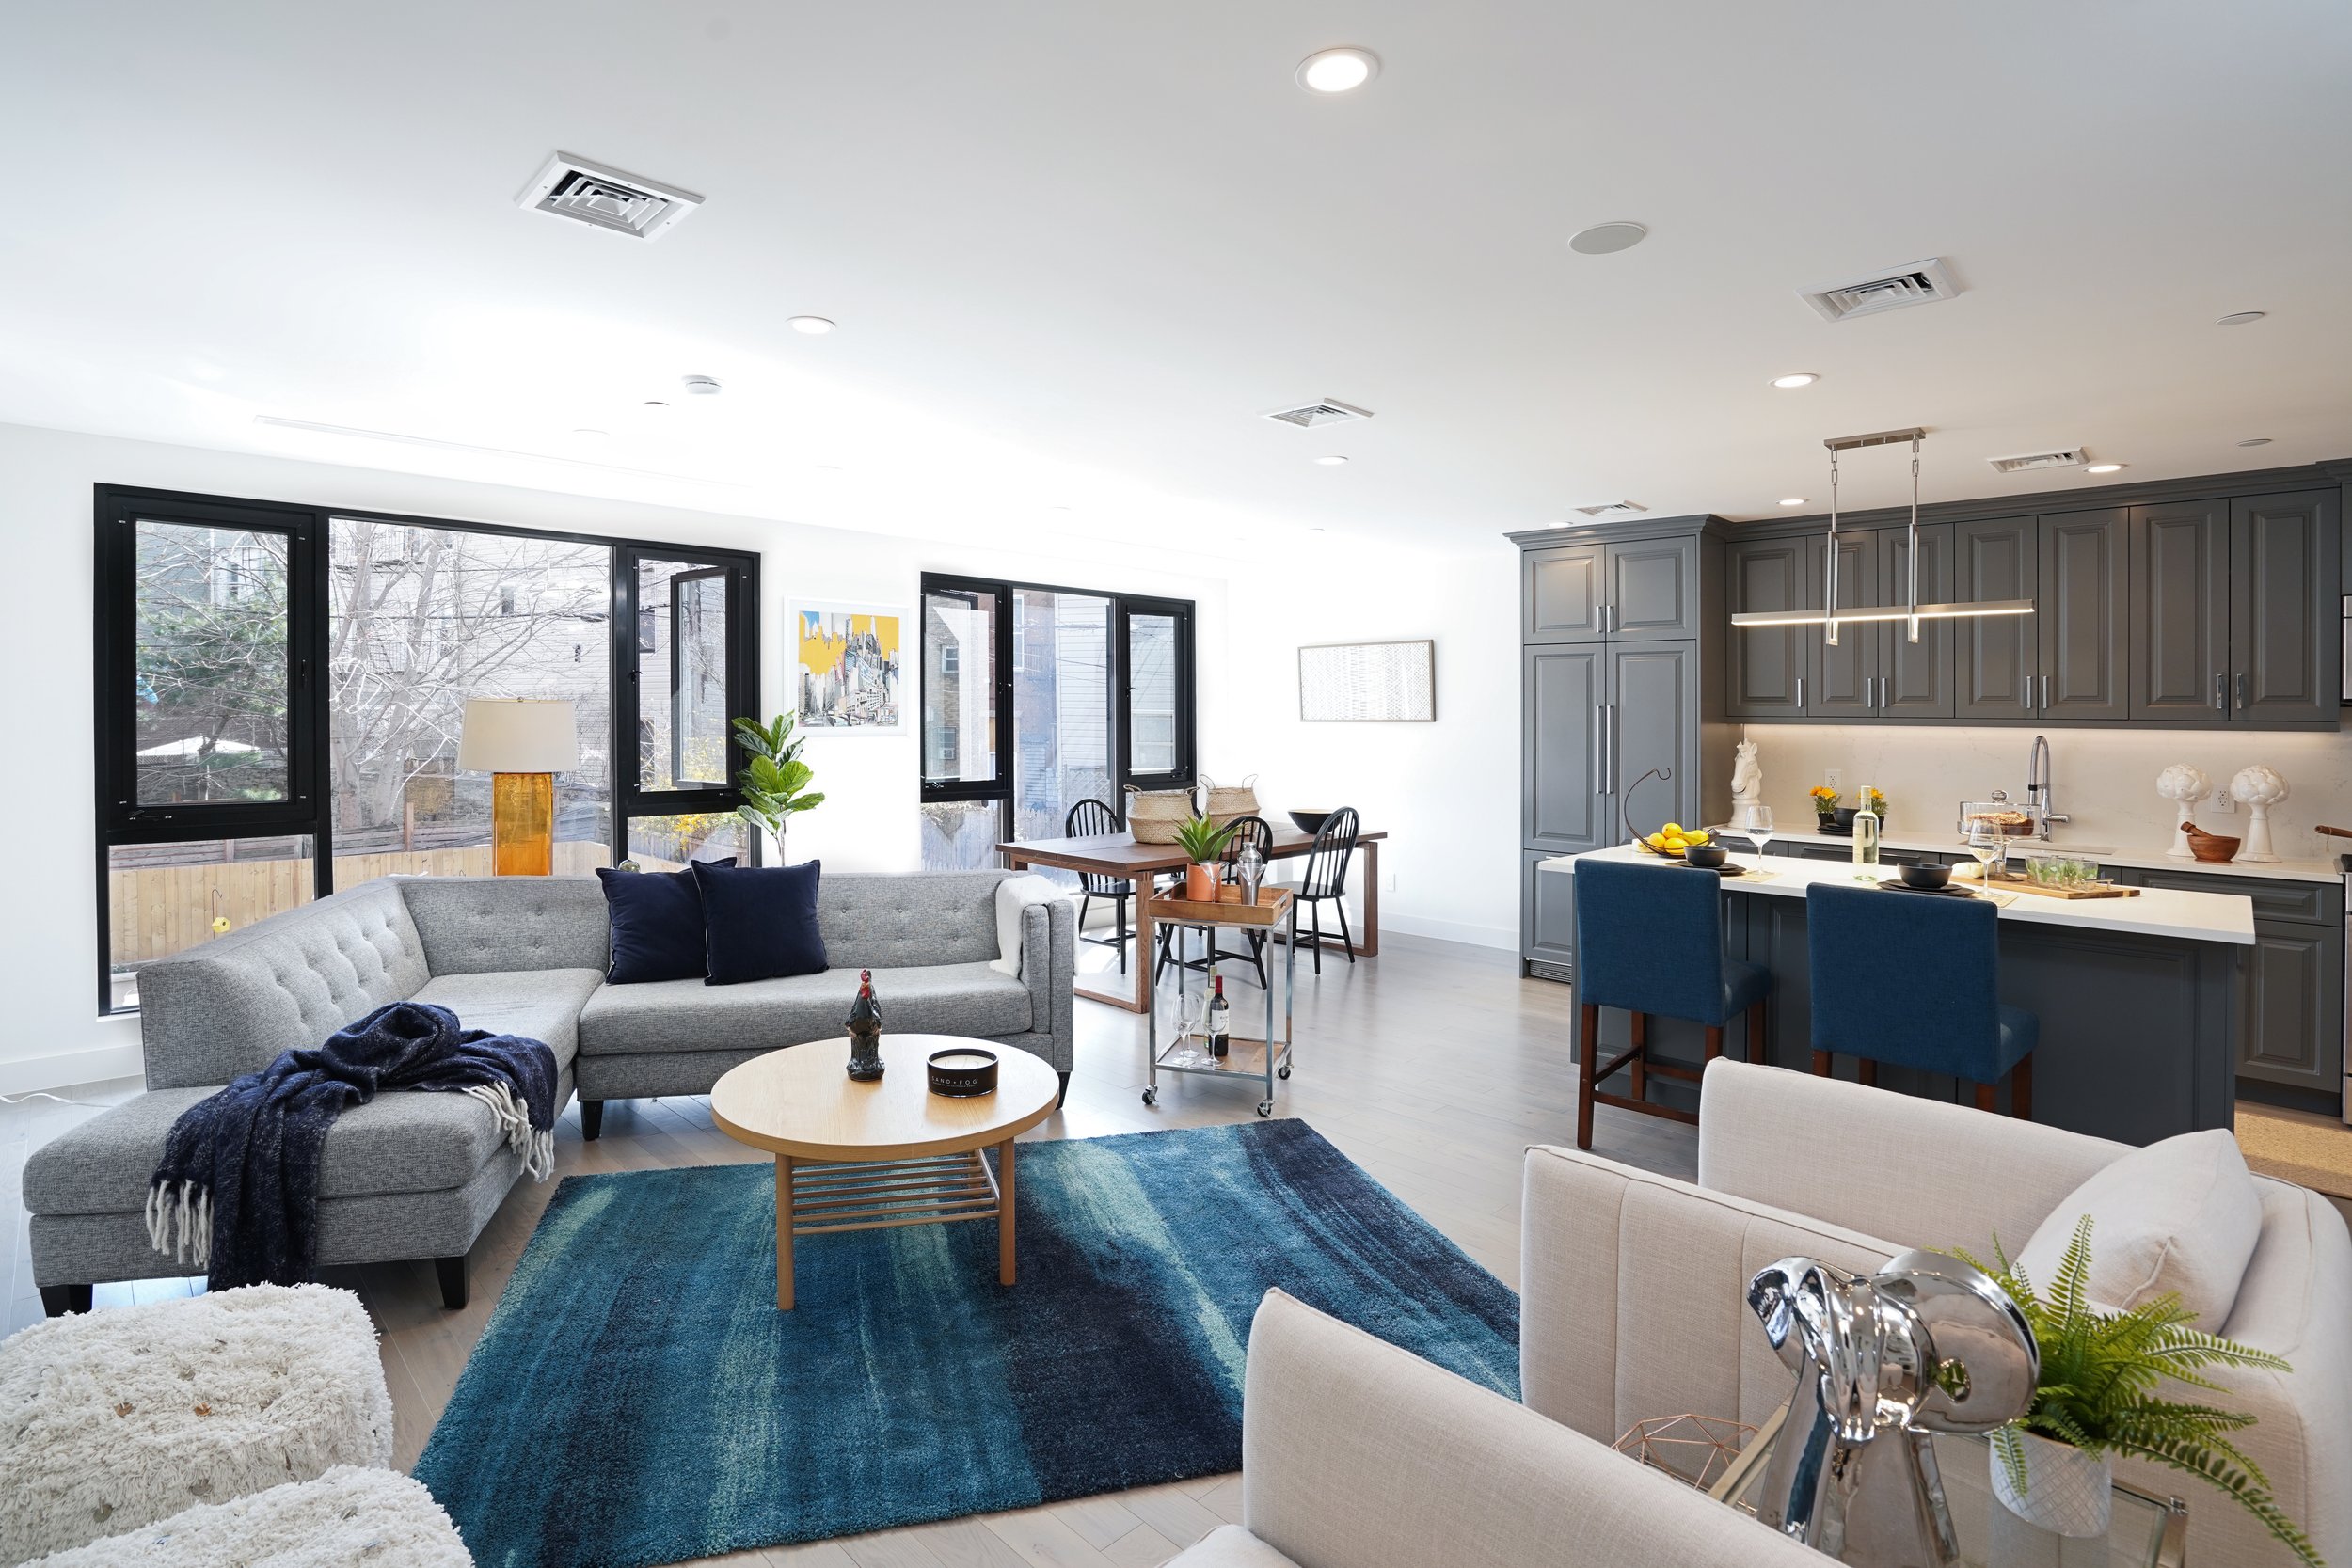  The condominium’s single duplex residence spans the ground floor and includes a striking double-tiered garden terrace in order to provide multiple points of indoor outdoor connection. Similarly, the full floor home spanning the third story of the bu